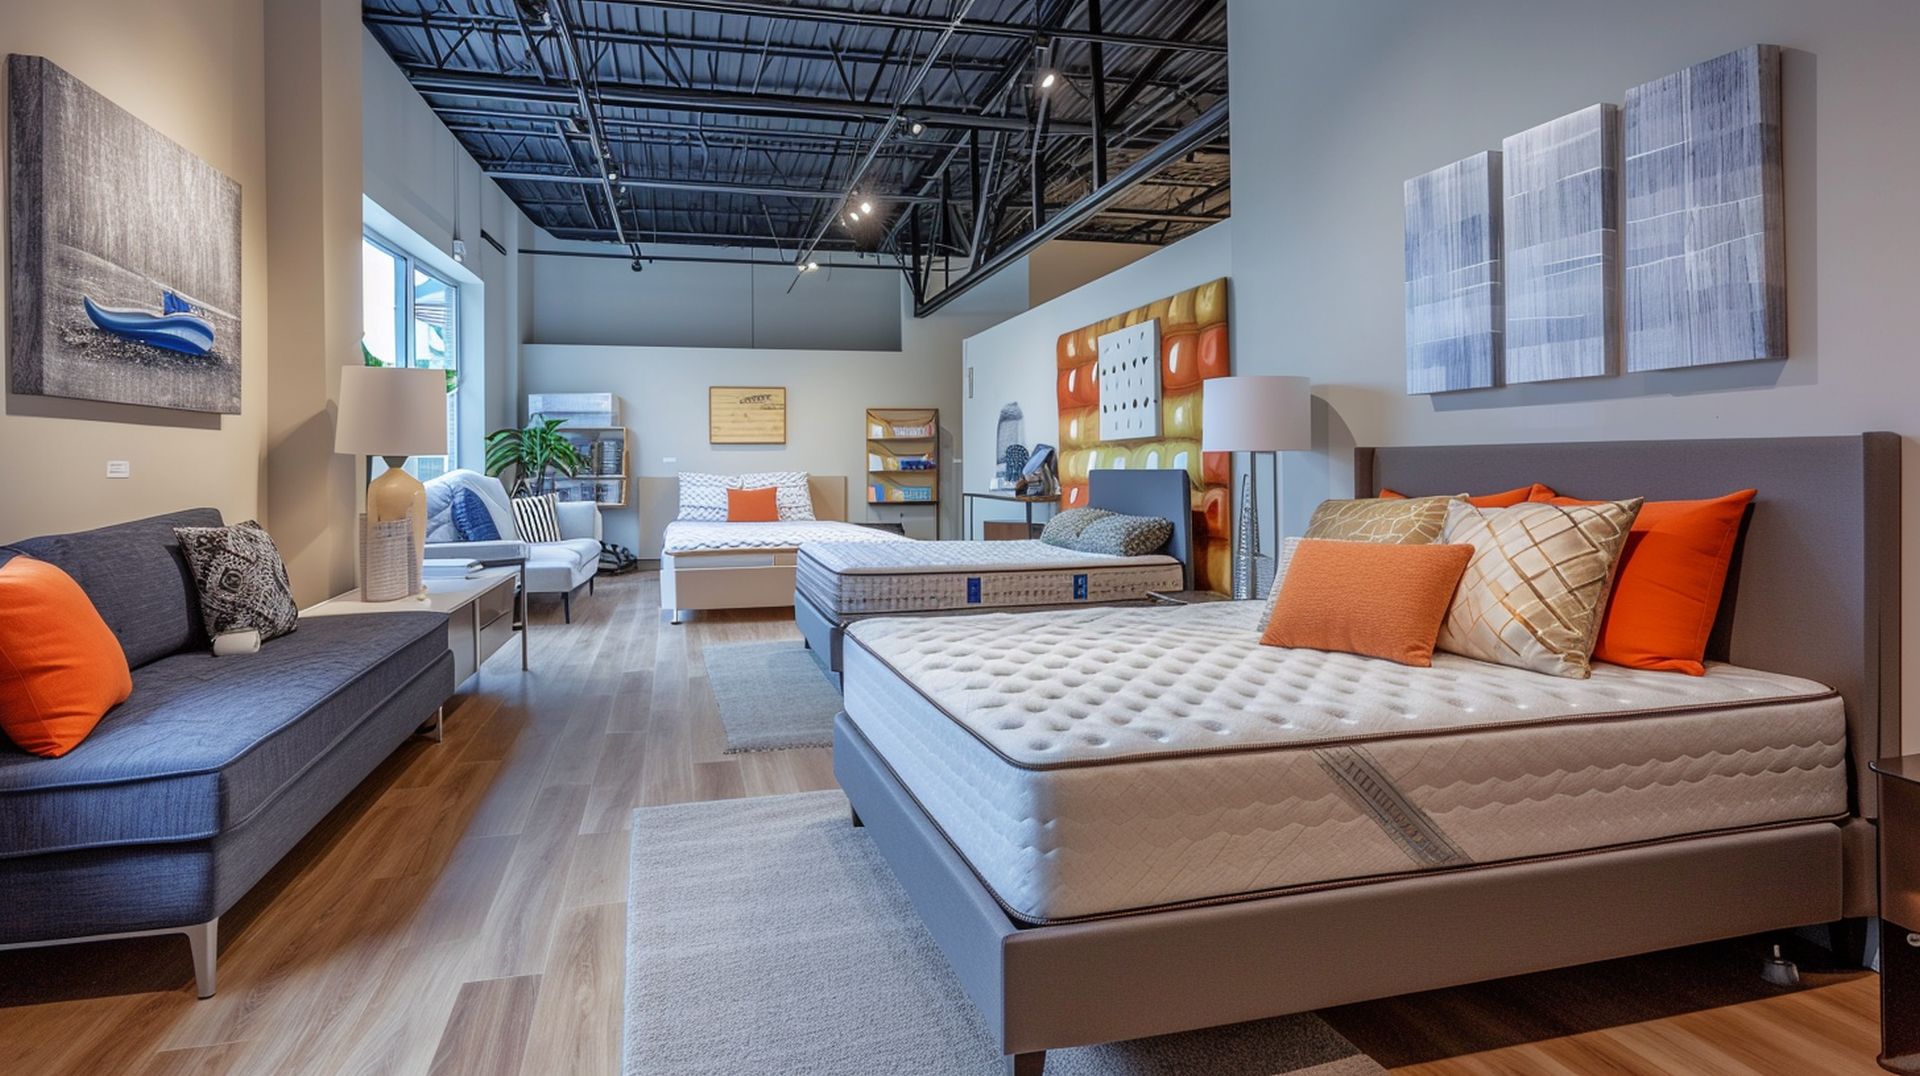 If you're looking for a new bed, mattress stores in Tustin offer the best customer and delivery service, financing, and warranties in California